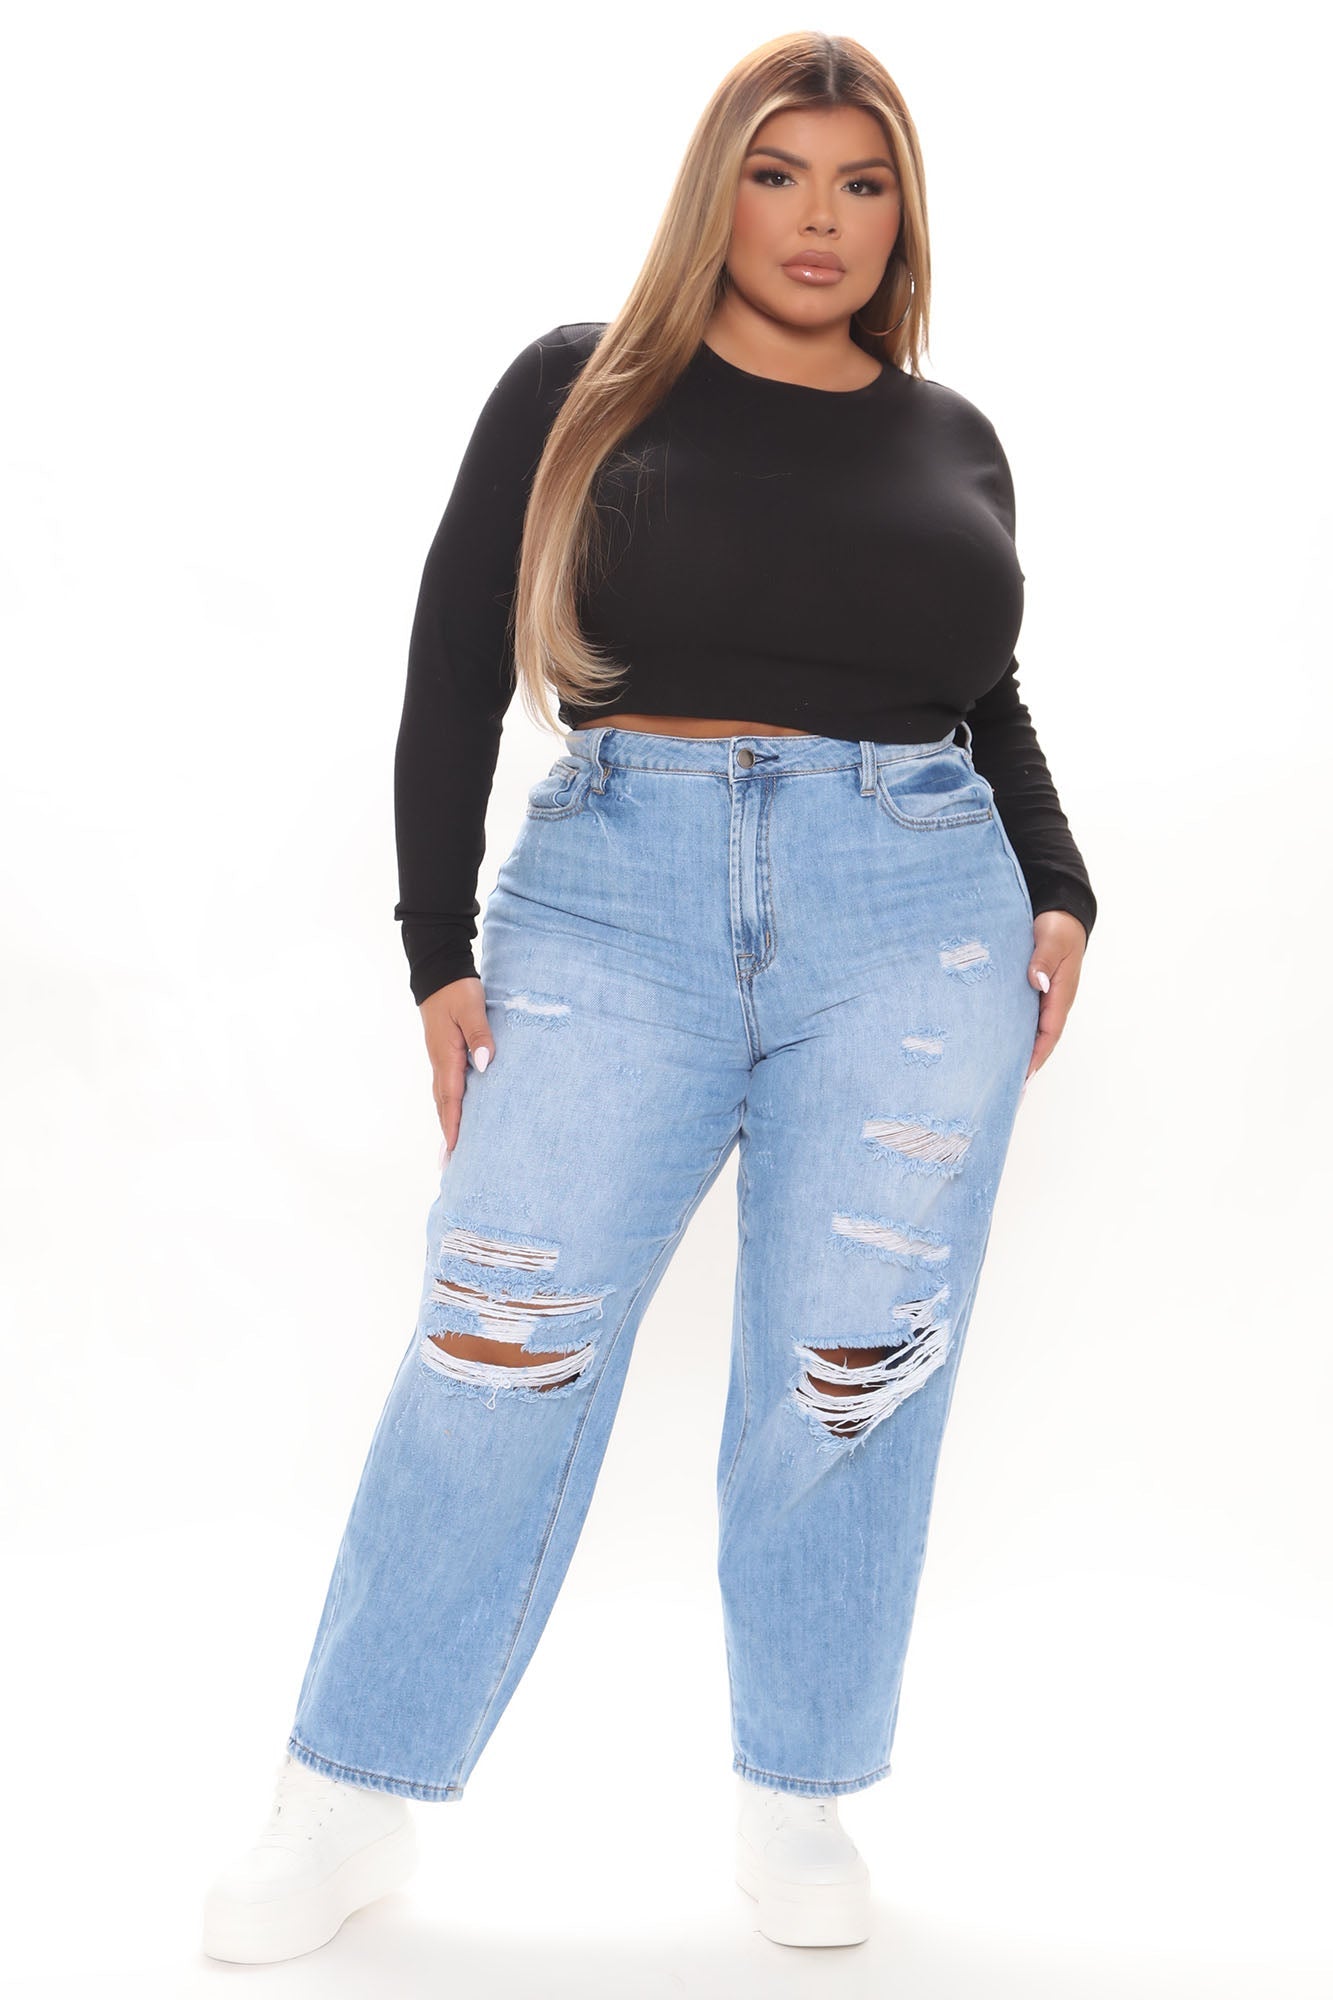 Why Don't You Relax Ripped Mom Jeans - Medium Blue Wash Ins Street